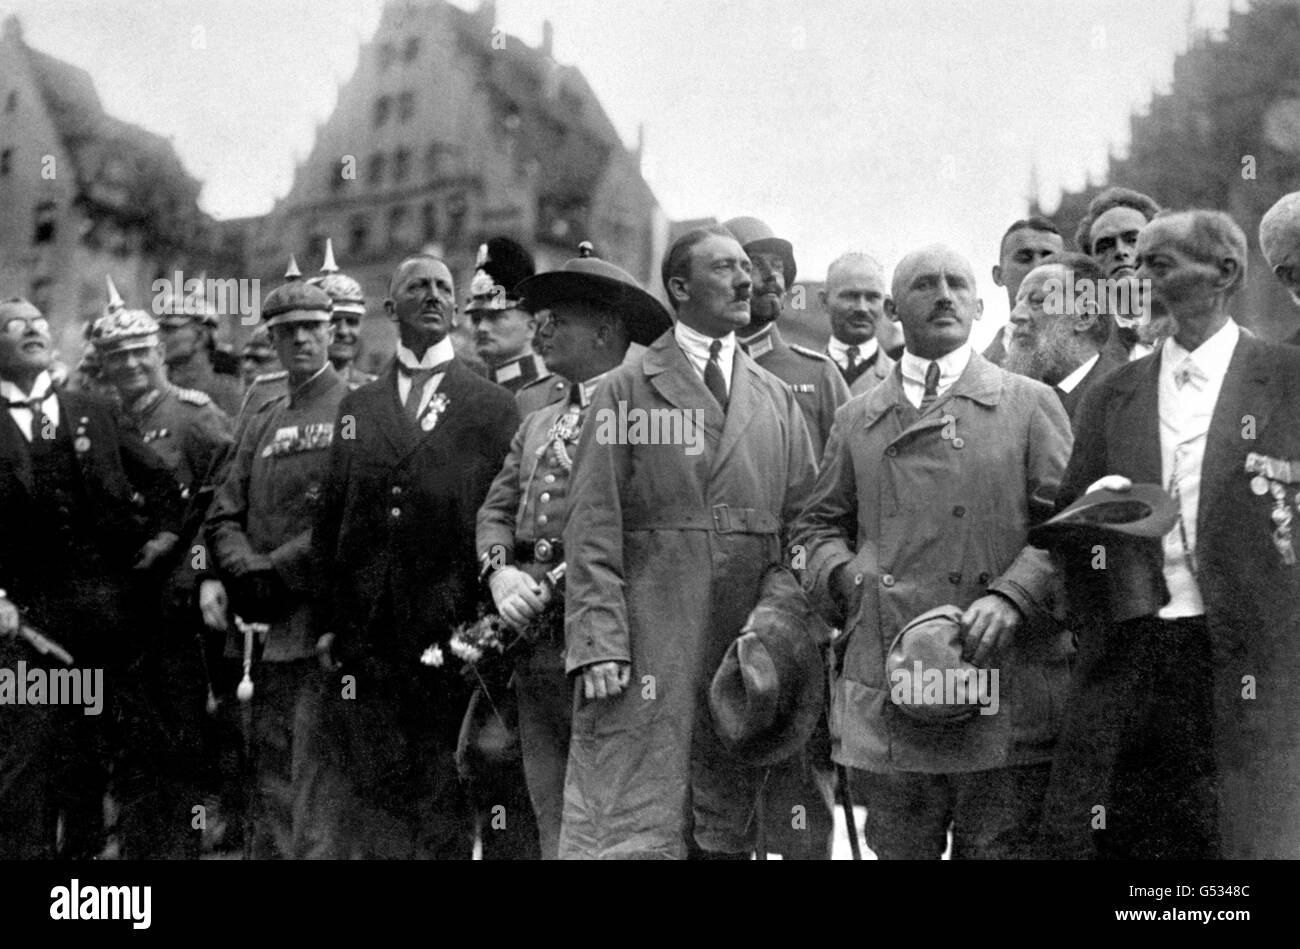 ADOLF HITLER 1923 (c, in trenchcoat), leader of the NSDAP and Julius Streicher (to Hitler's left, bald), editor of 'Der Sturmer', watch a march past of Nationalist adherents on 'German Day' in Nuremberg, Bavaria. Around 100,000 people are estimated to have attended the event. *With them are dignitaries and Imperial Army officers from the Kaiser's era. Stock Photo